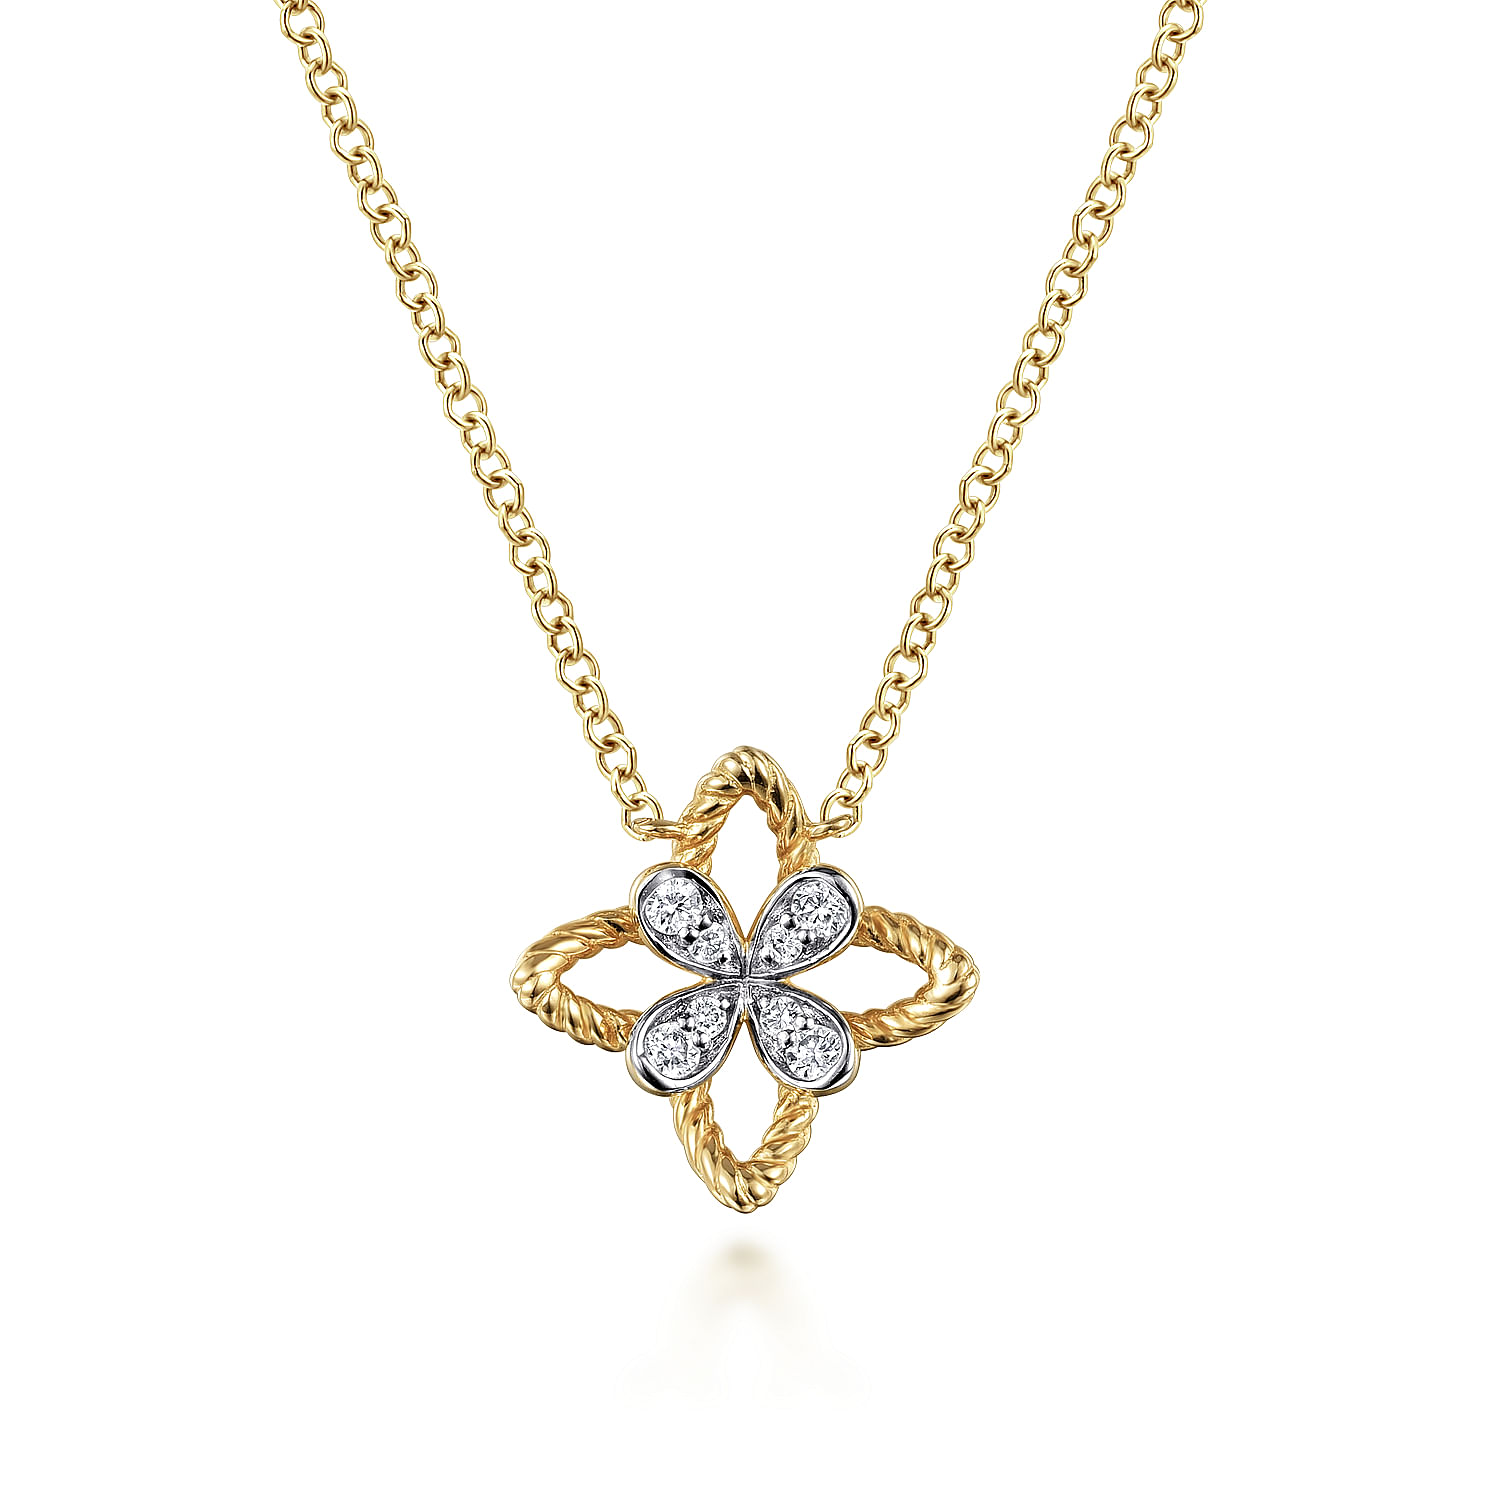 14K Yellow Gold Twisted Rope Clover Pendant Necklace with Diamond Petals